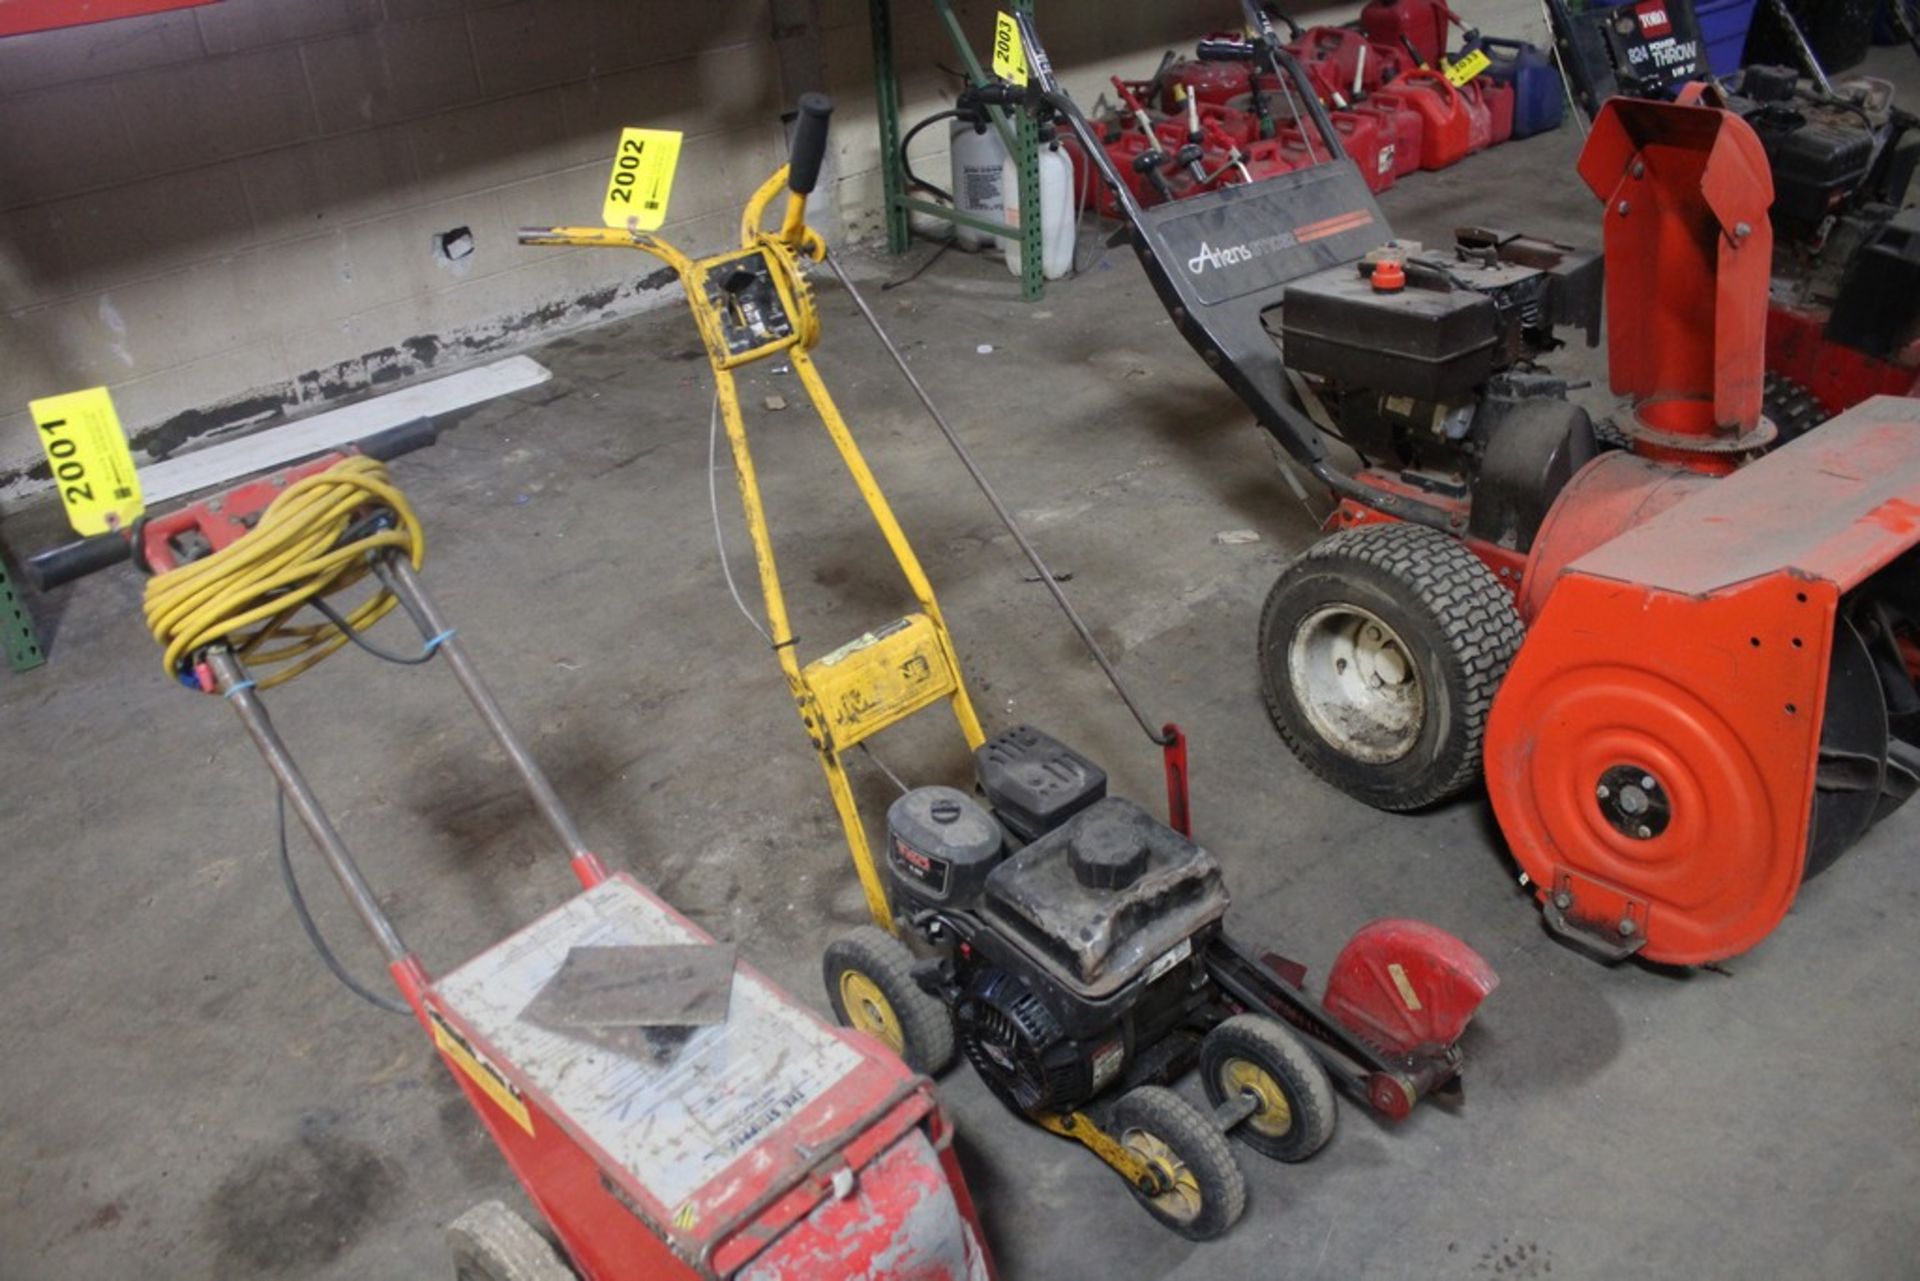 GAS POWERED EDGER WITH BRIGGS & STRATTON ENGINE